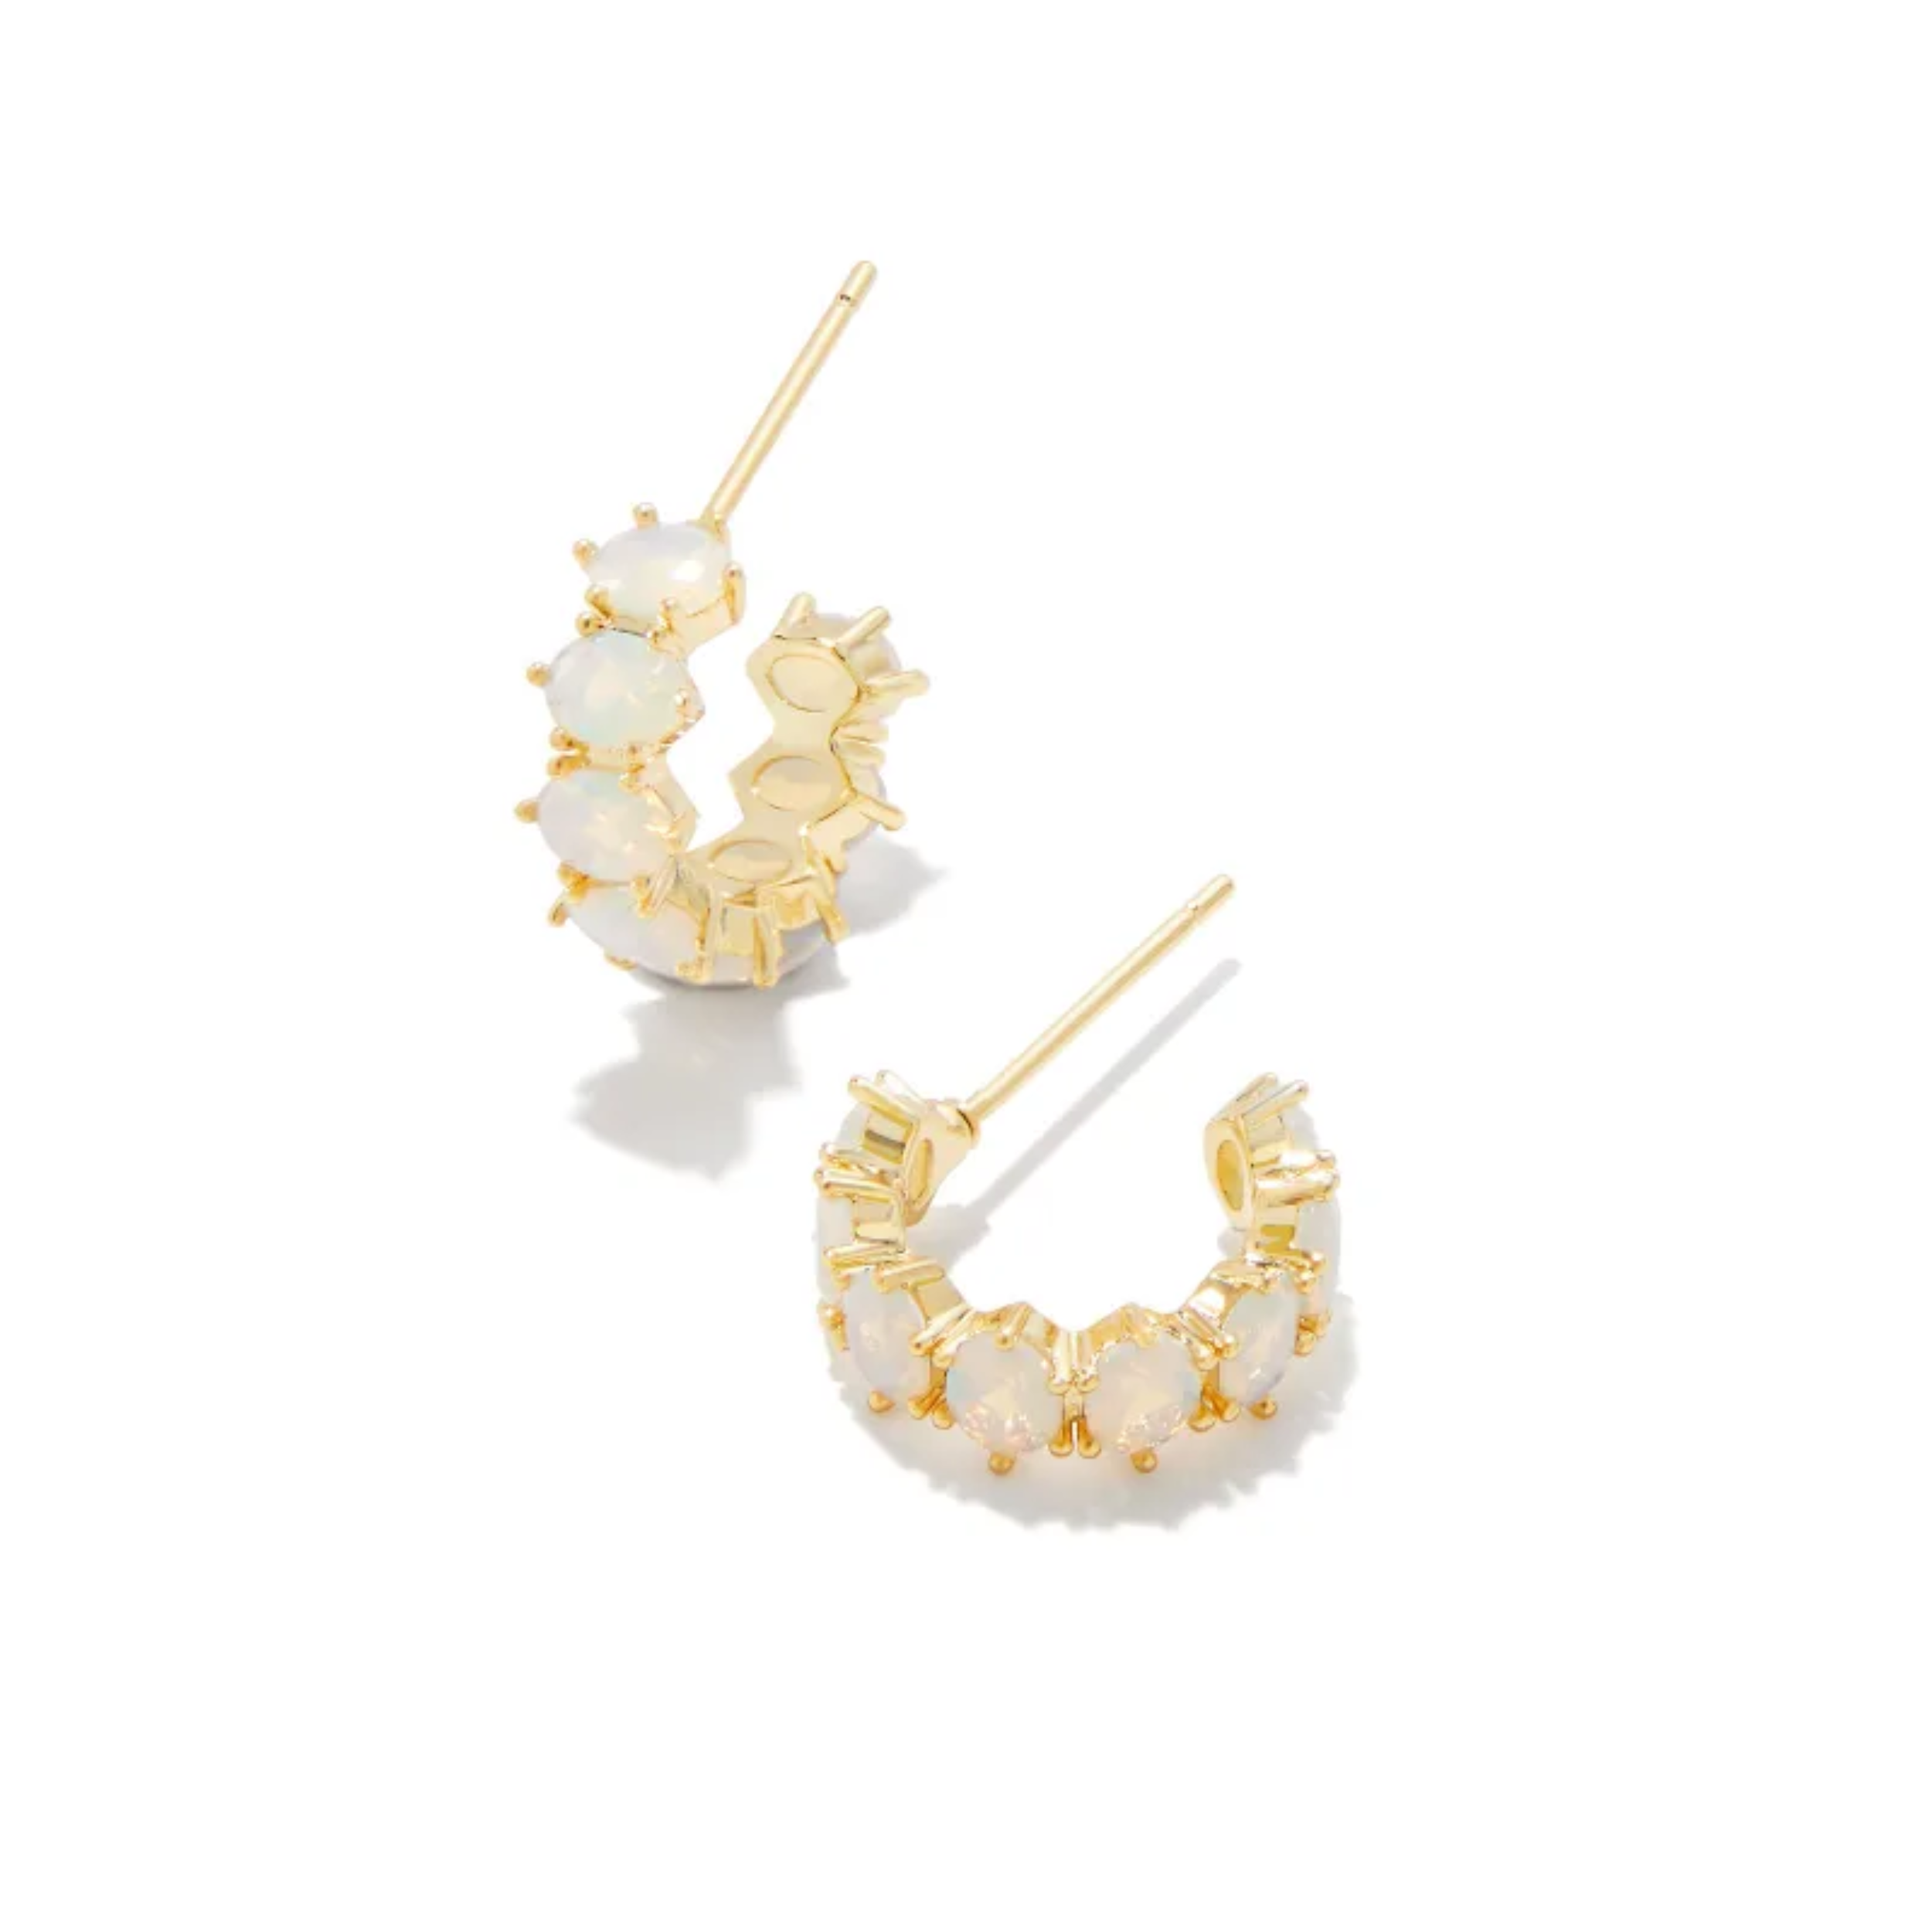 These Cailin Gold Crystal Huggie Earrings in Champagne Opal Crystal by Kendra Scott are pictured on a white background.